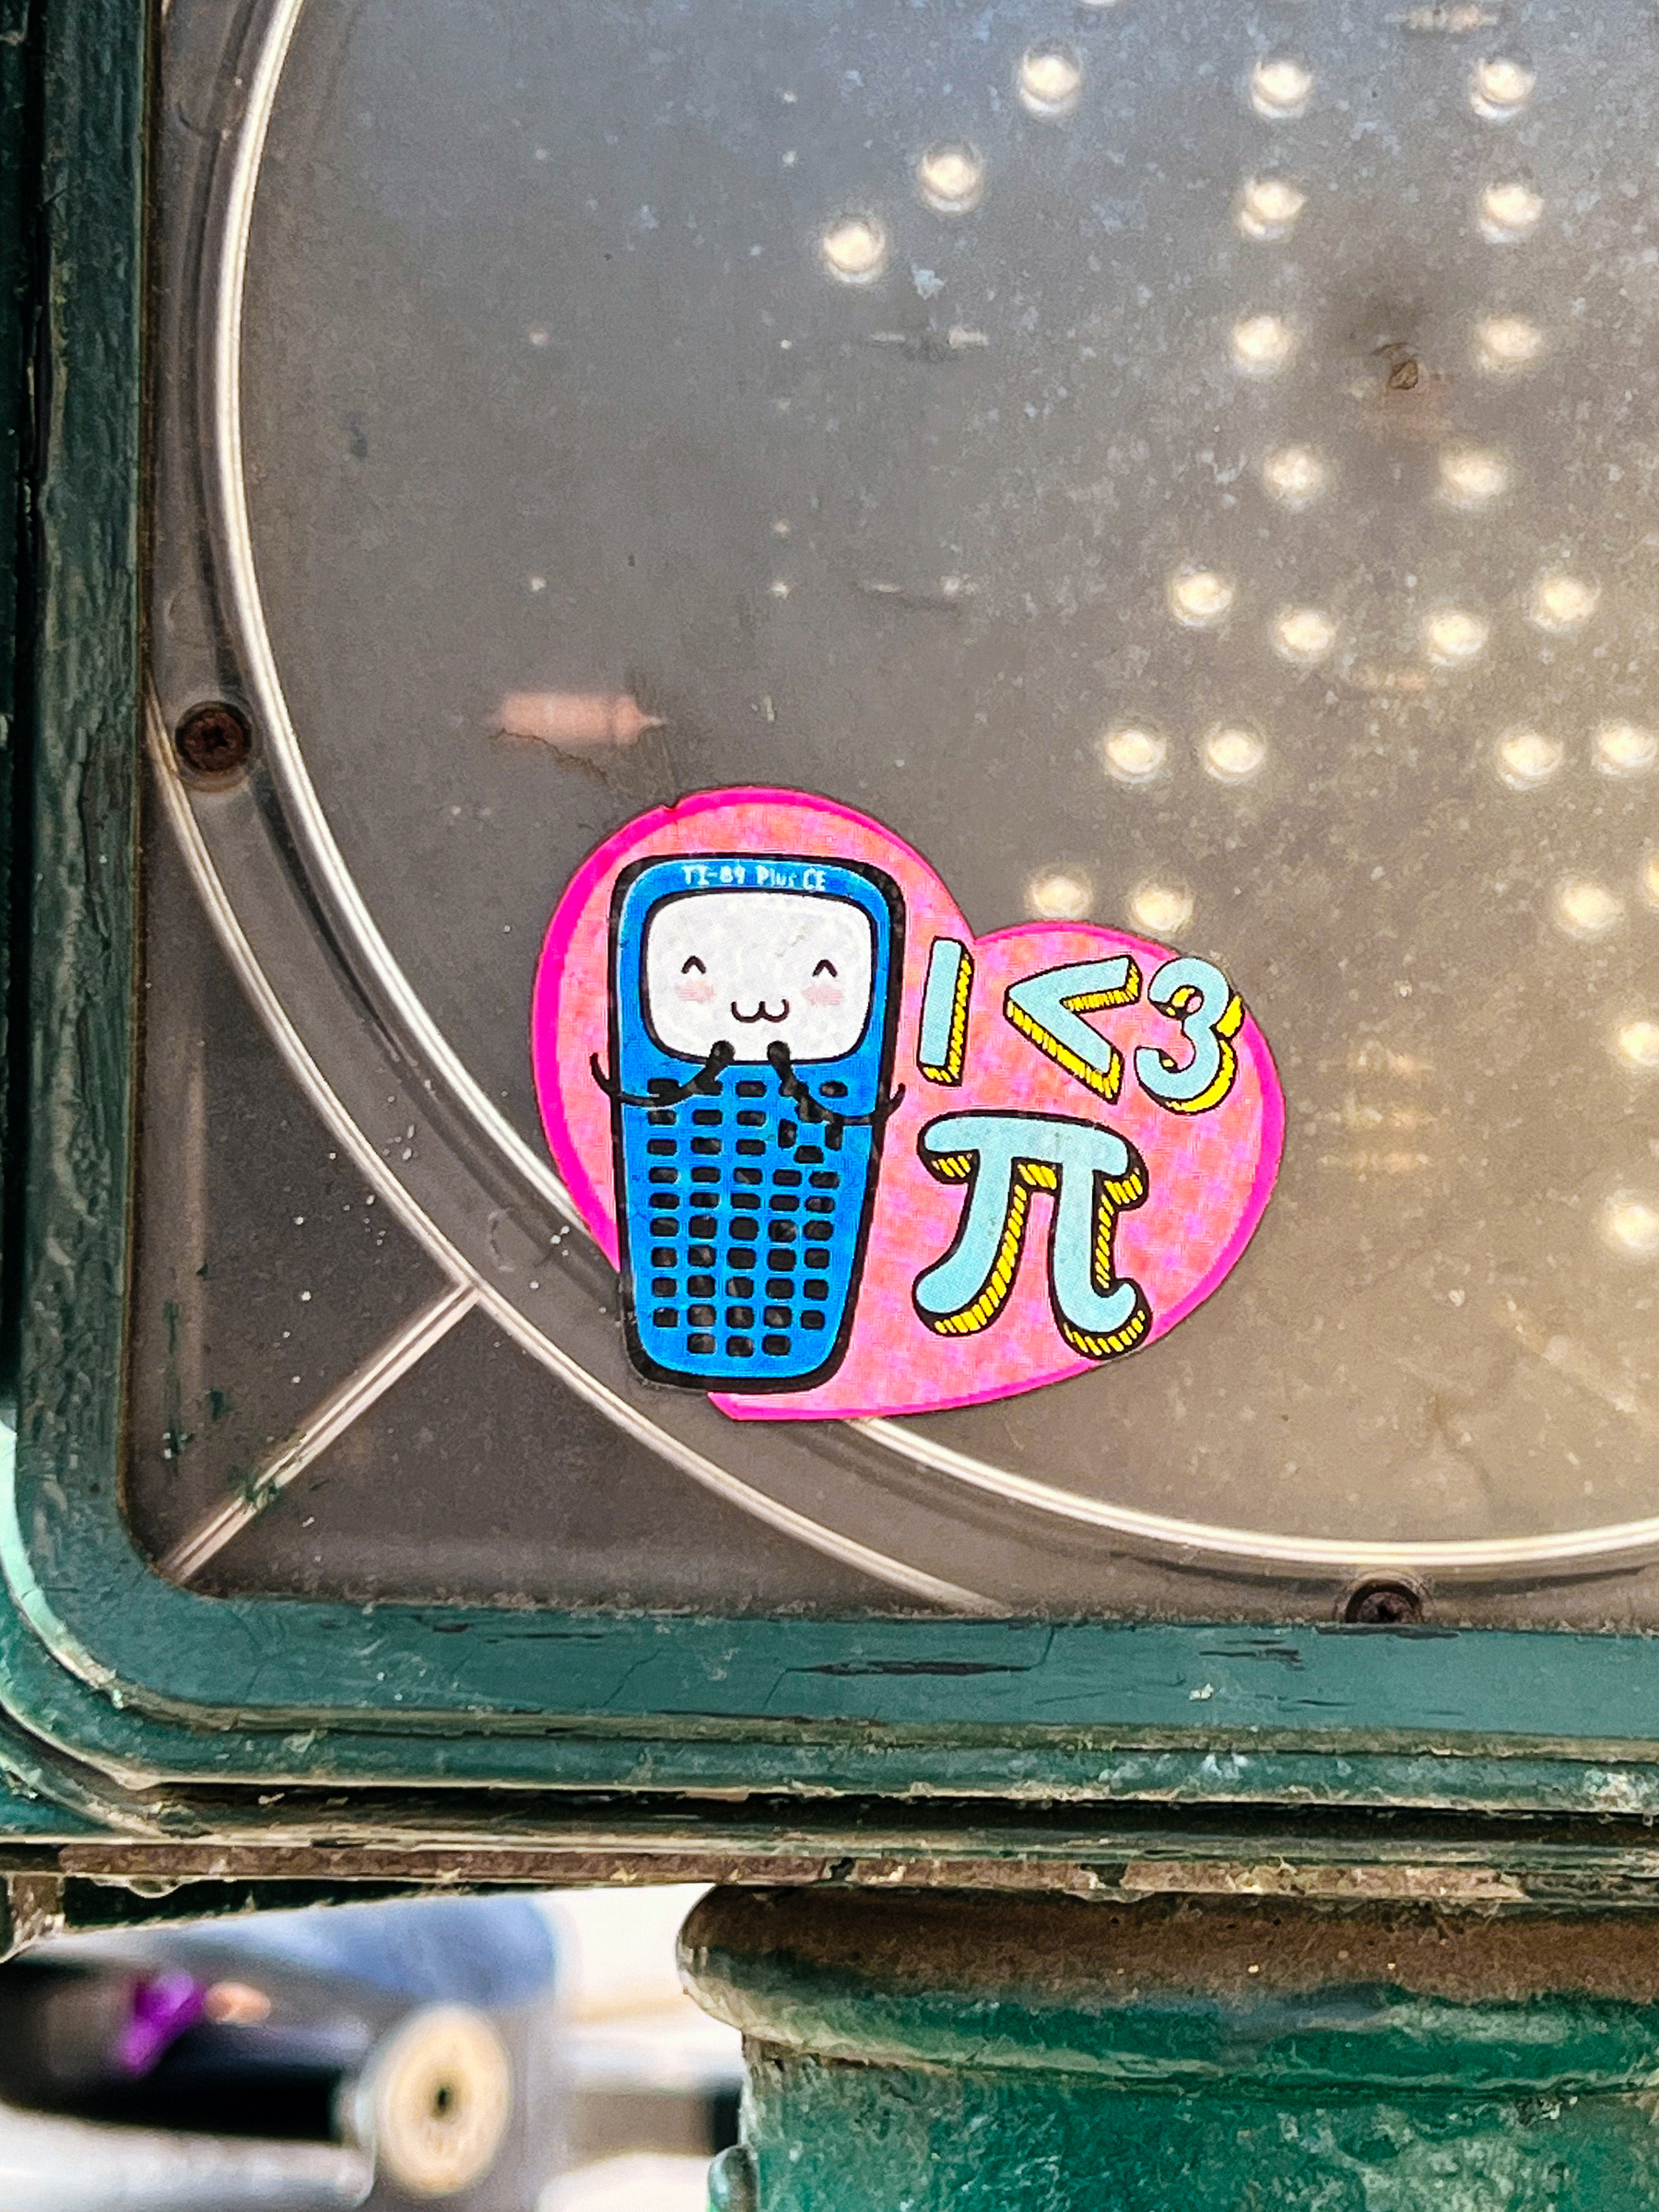 A smiling calculator and &ldquo;I &lt; 3 π&rdquo;, over a pink heart. 